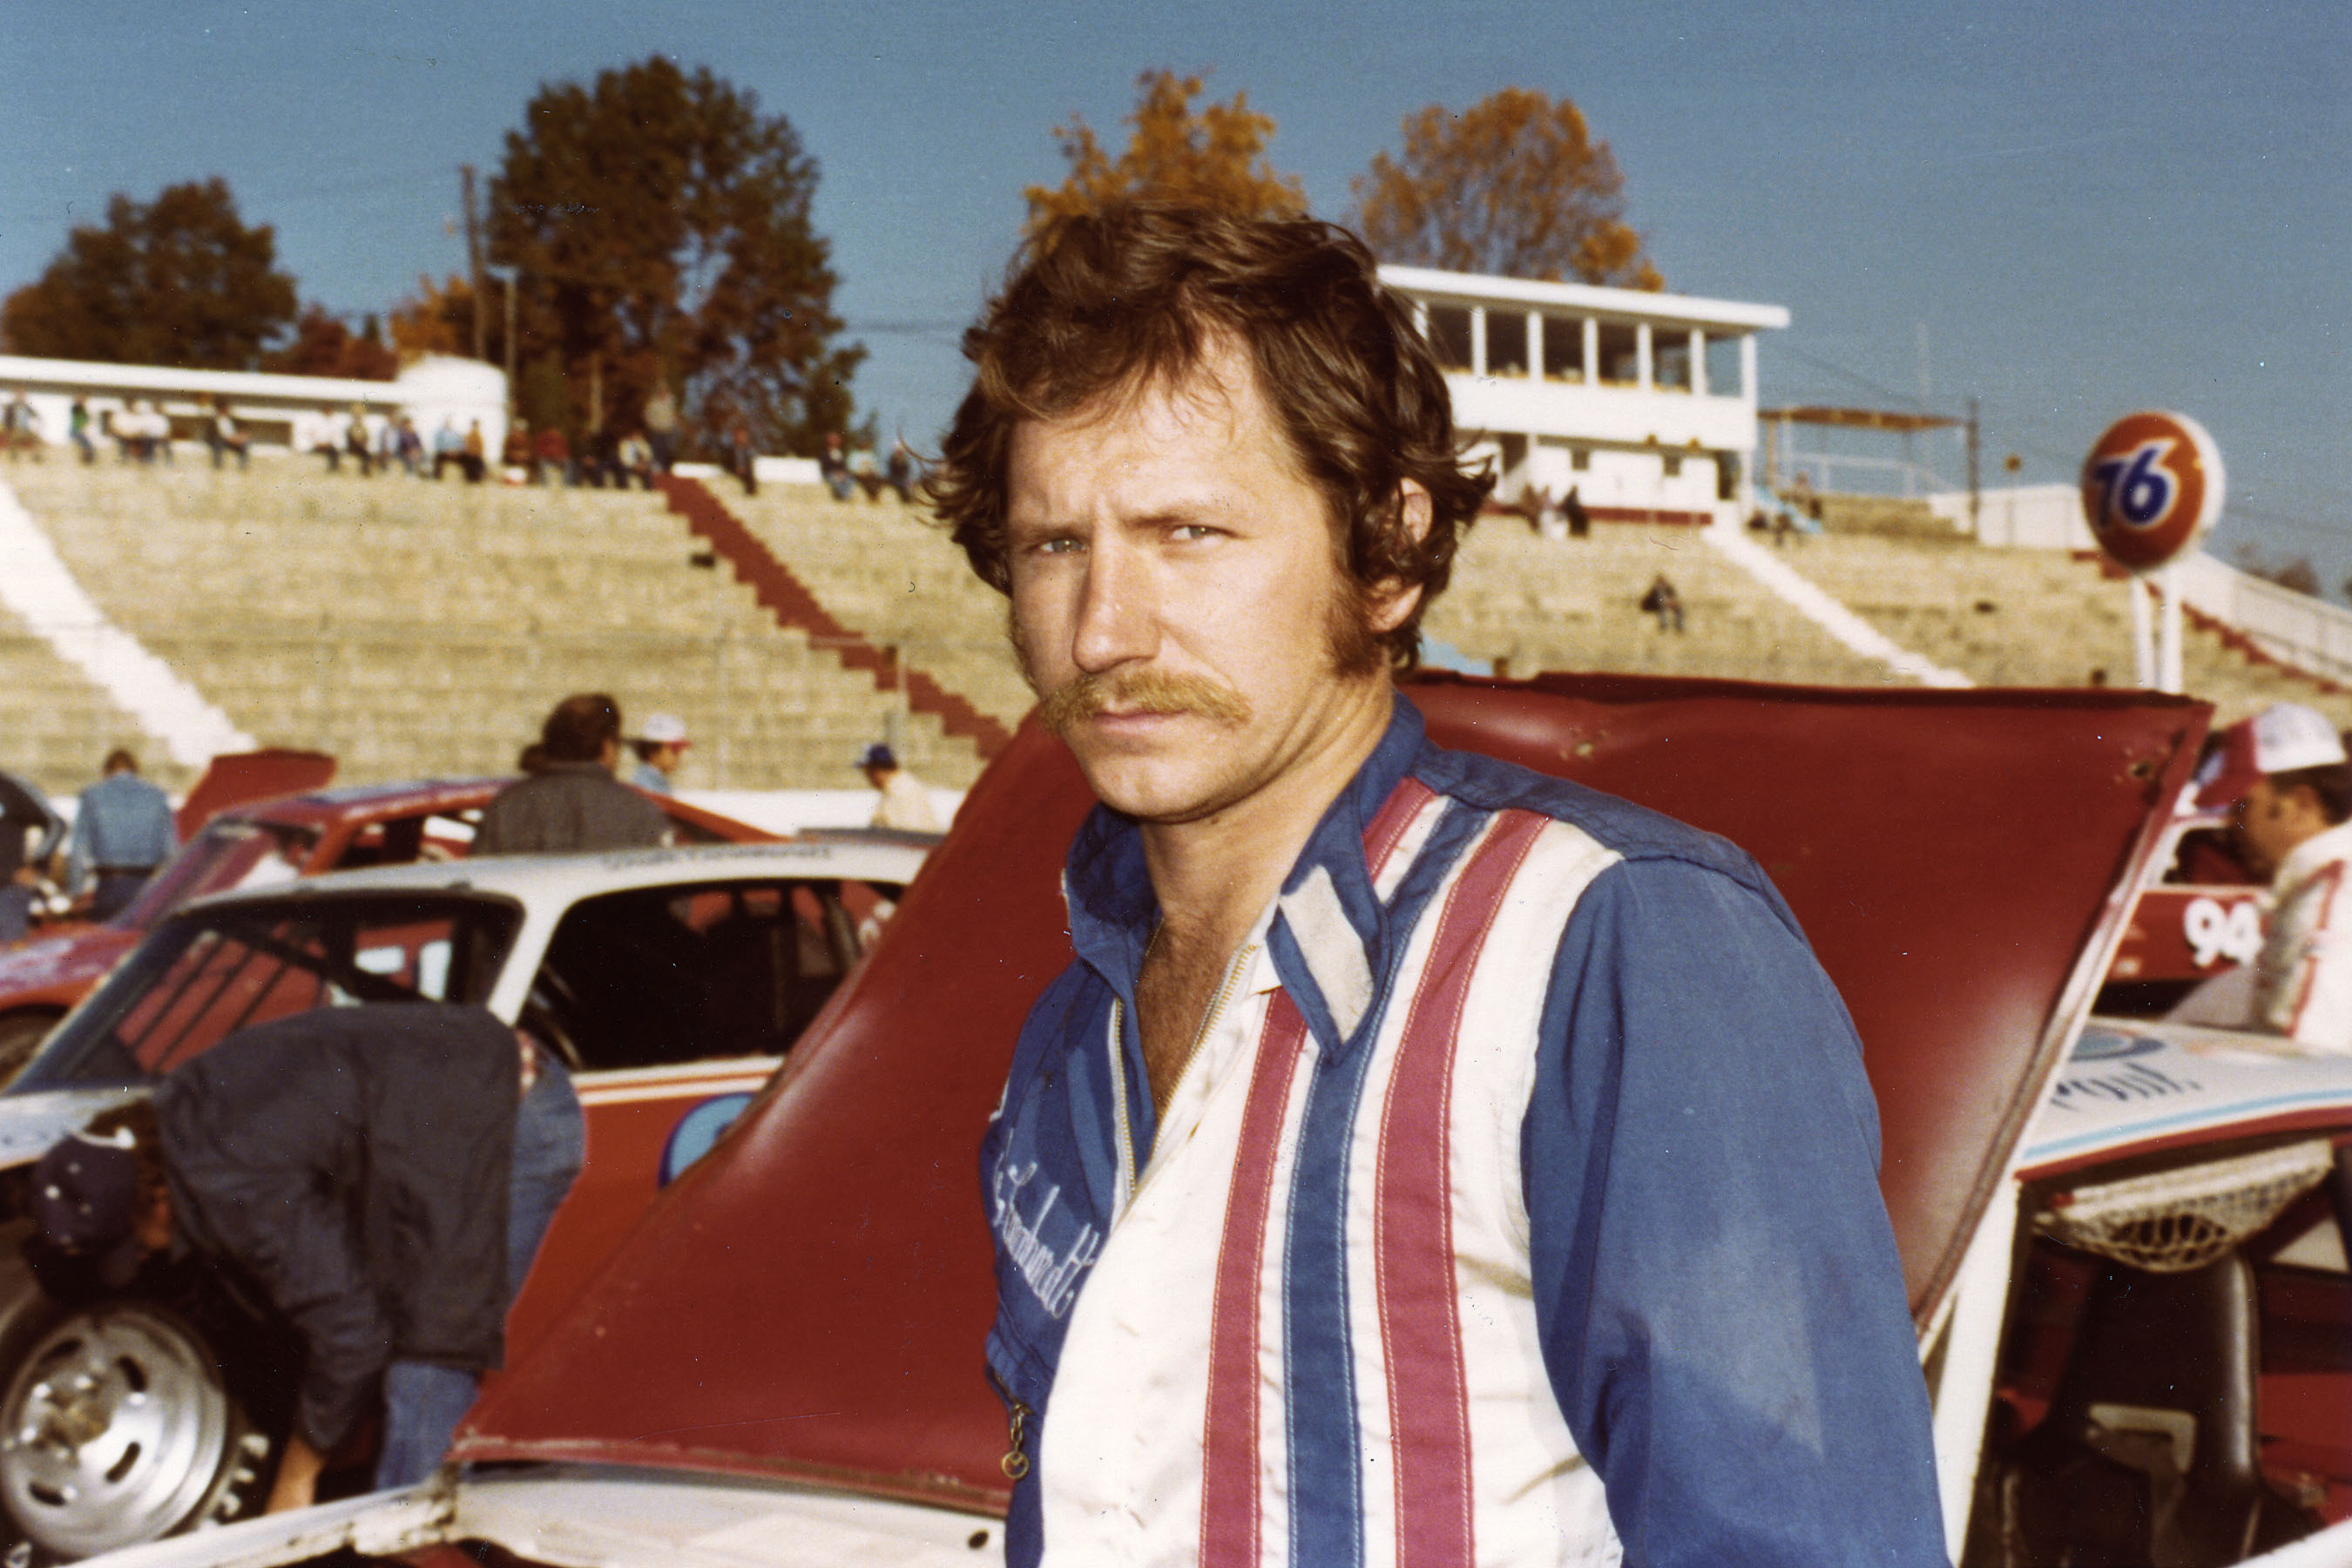 Dale Earnhardt in the infield pit area at a NASCAR short track prior to the beginning of his Cup Series career, on January 1, 1970. | Source: Getty Images